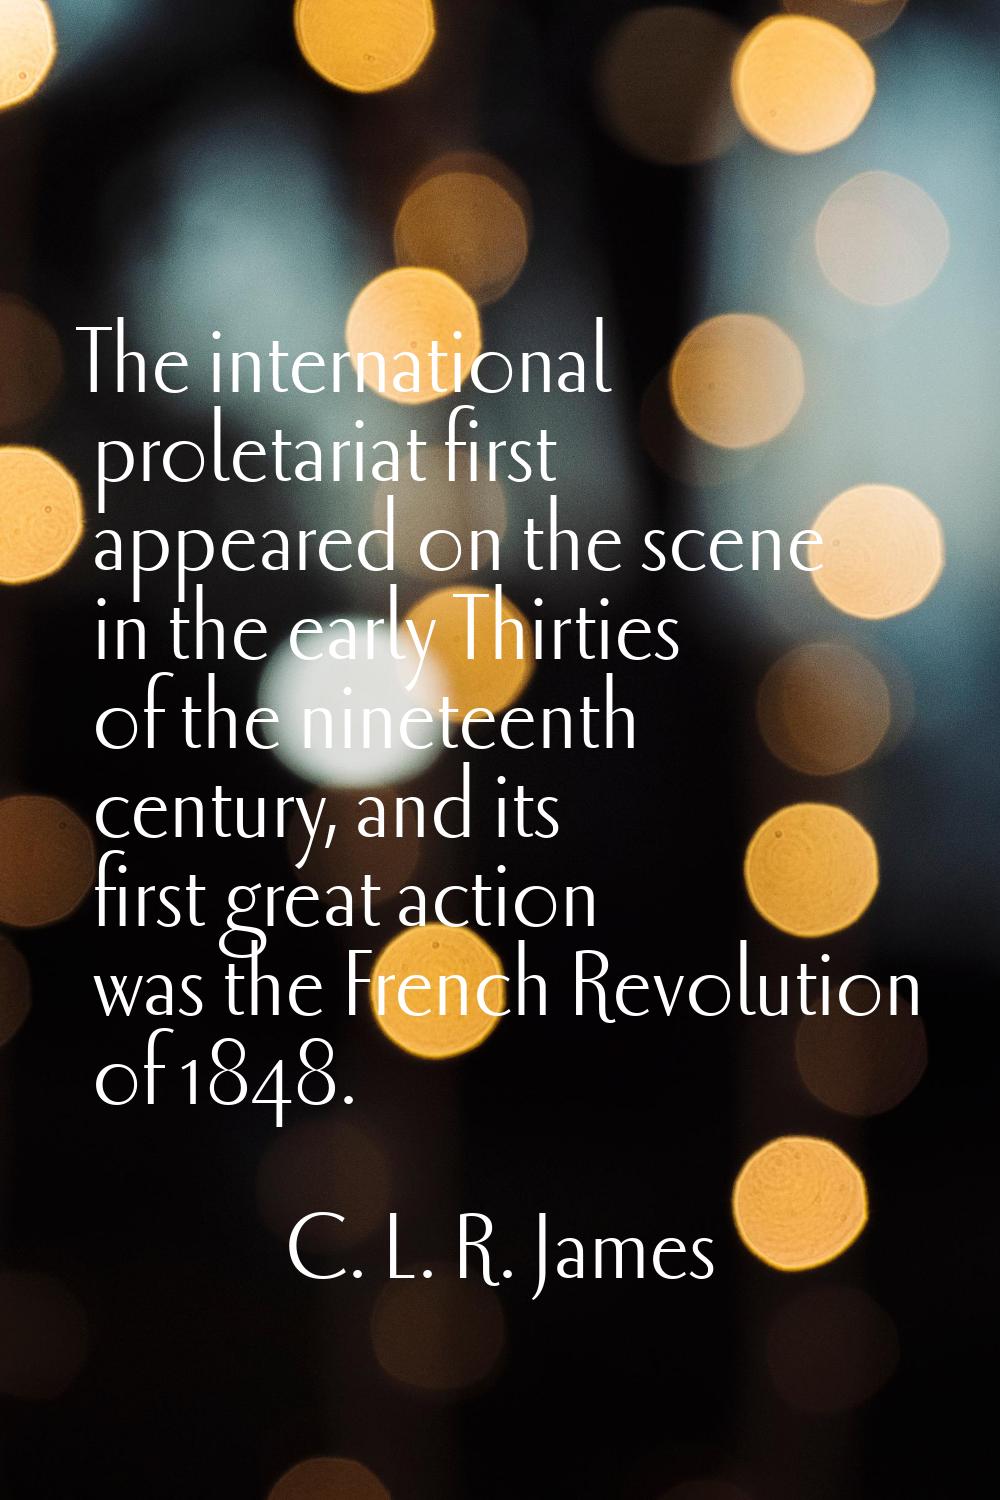 The international proletariat first appeared on the scene in the early Thirties of the nineteenth c